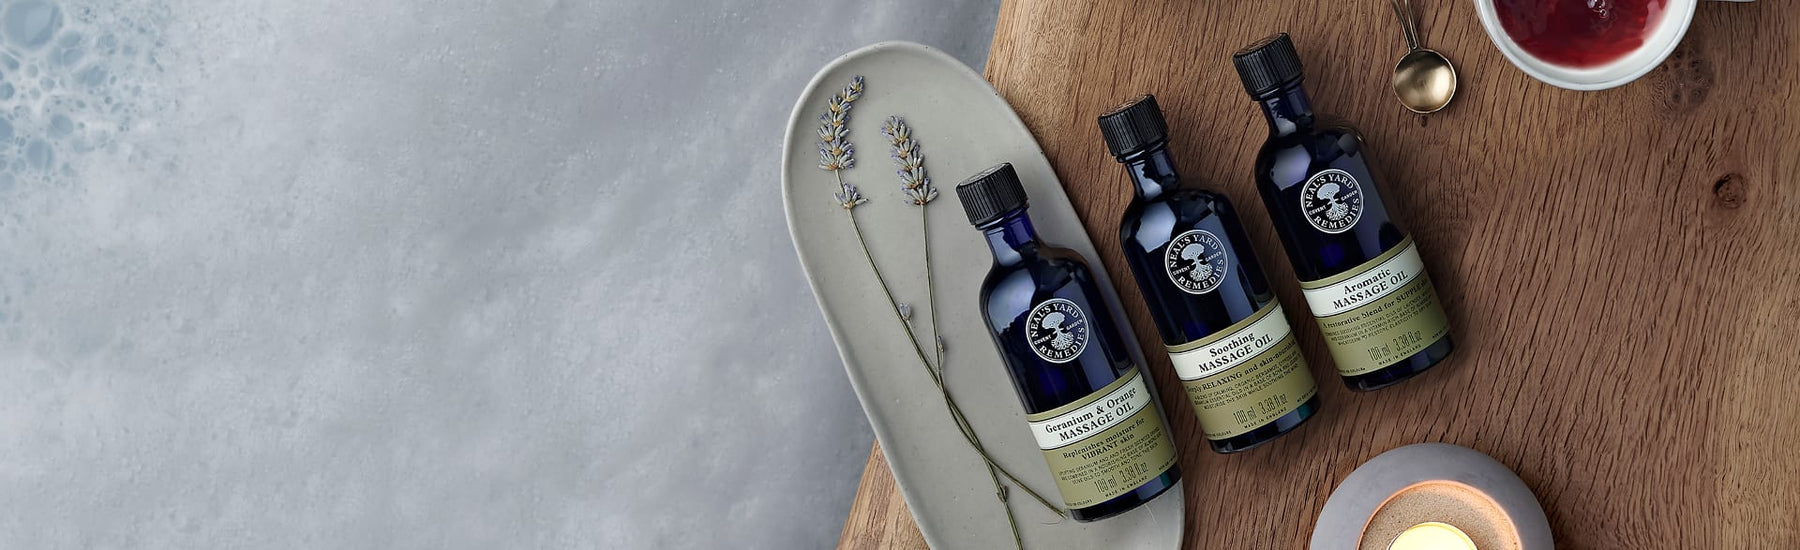 PIcture of three bottles of massage oils by Neal's Yard Remedies